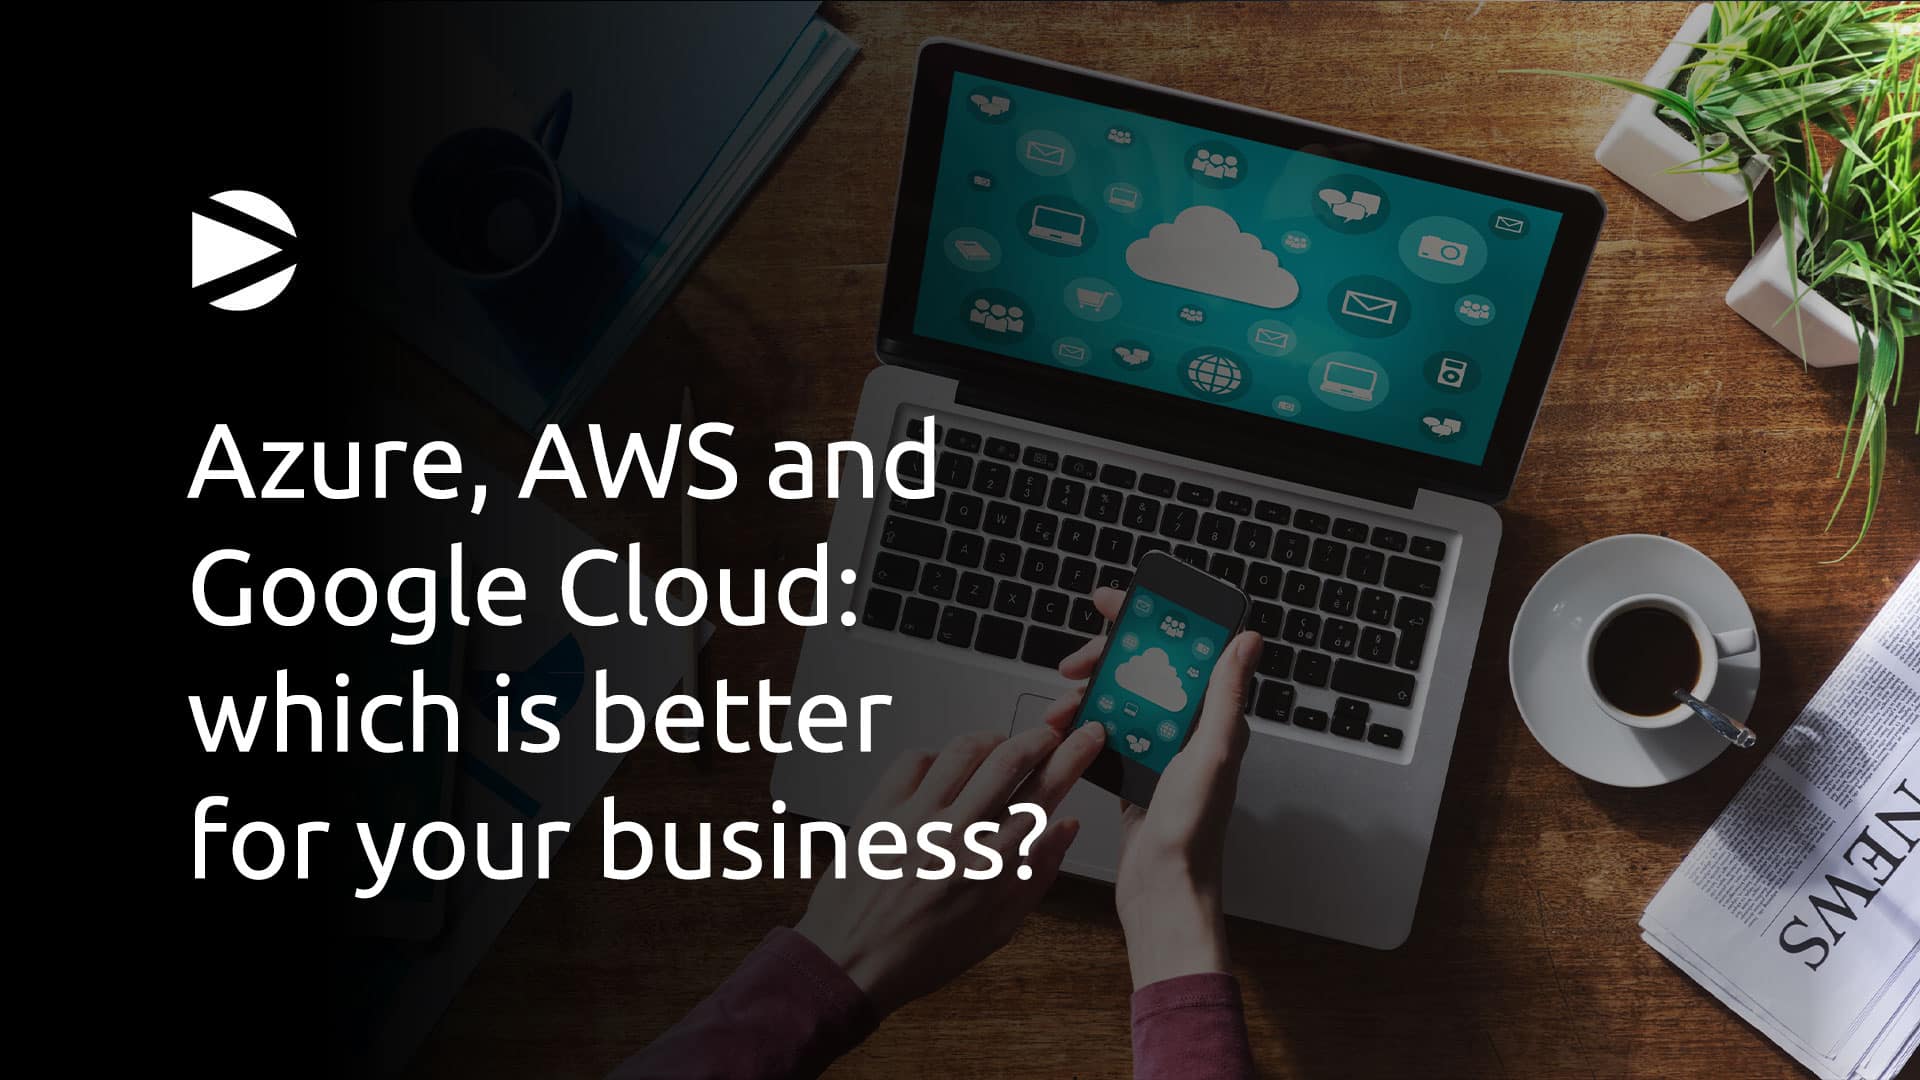 Azure, AWS and Google Cloud: which is better for your bussiness